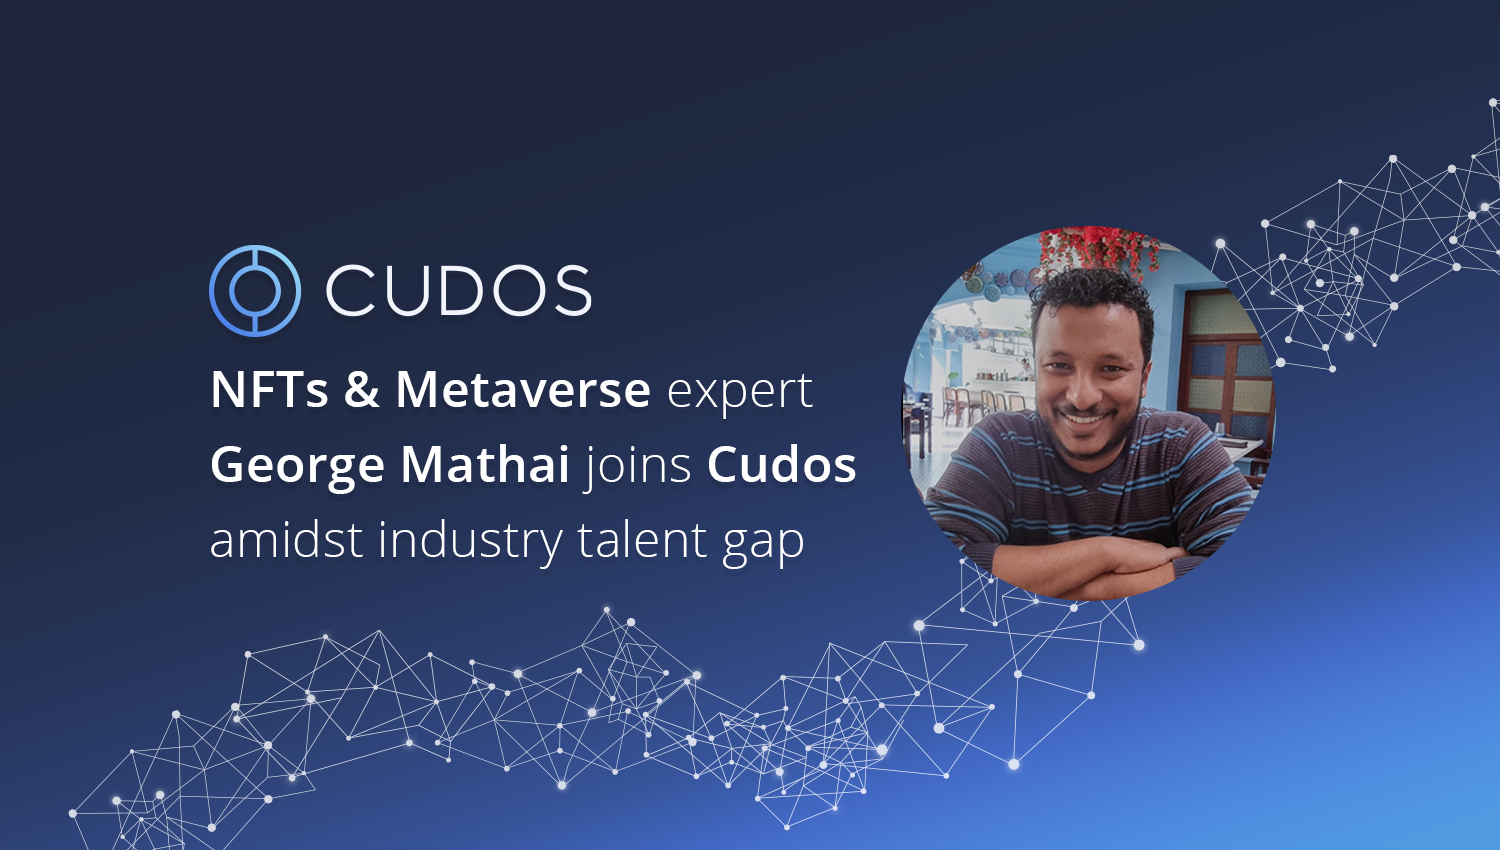 NFTs and Metaverse expert George Mathai joins Cudos amidst industry talent gap